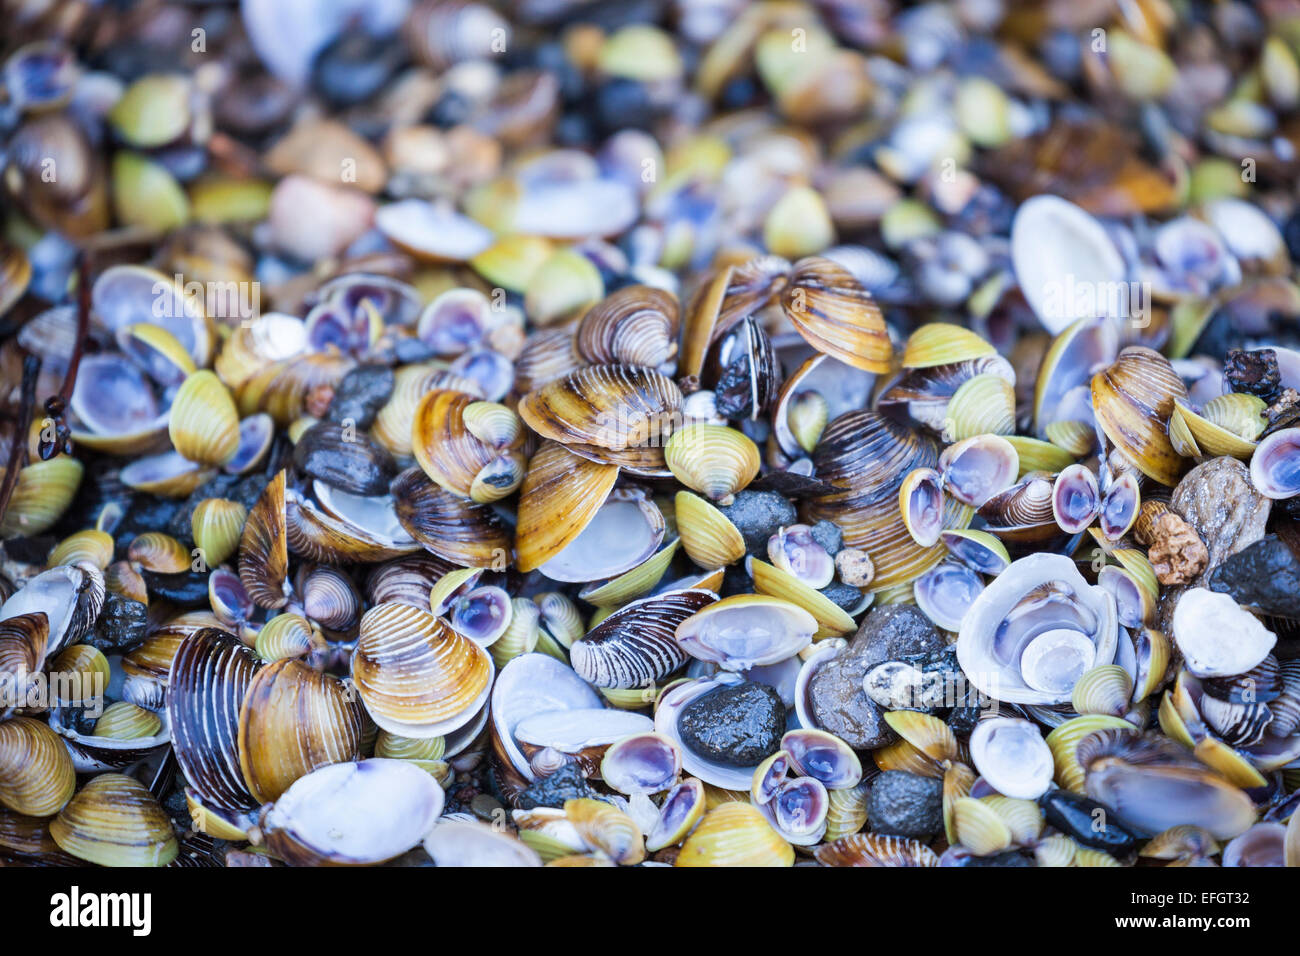 Freshwater mussels on the shores of the Aveyron river in France Stock Photo